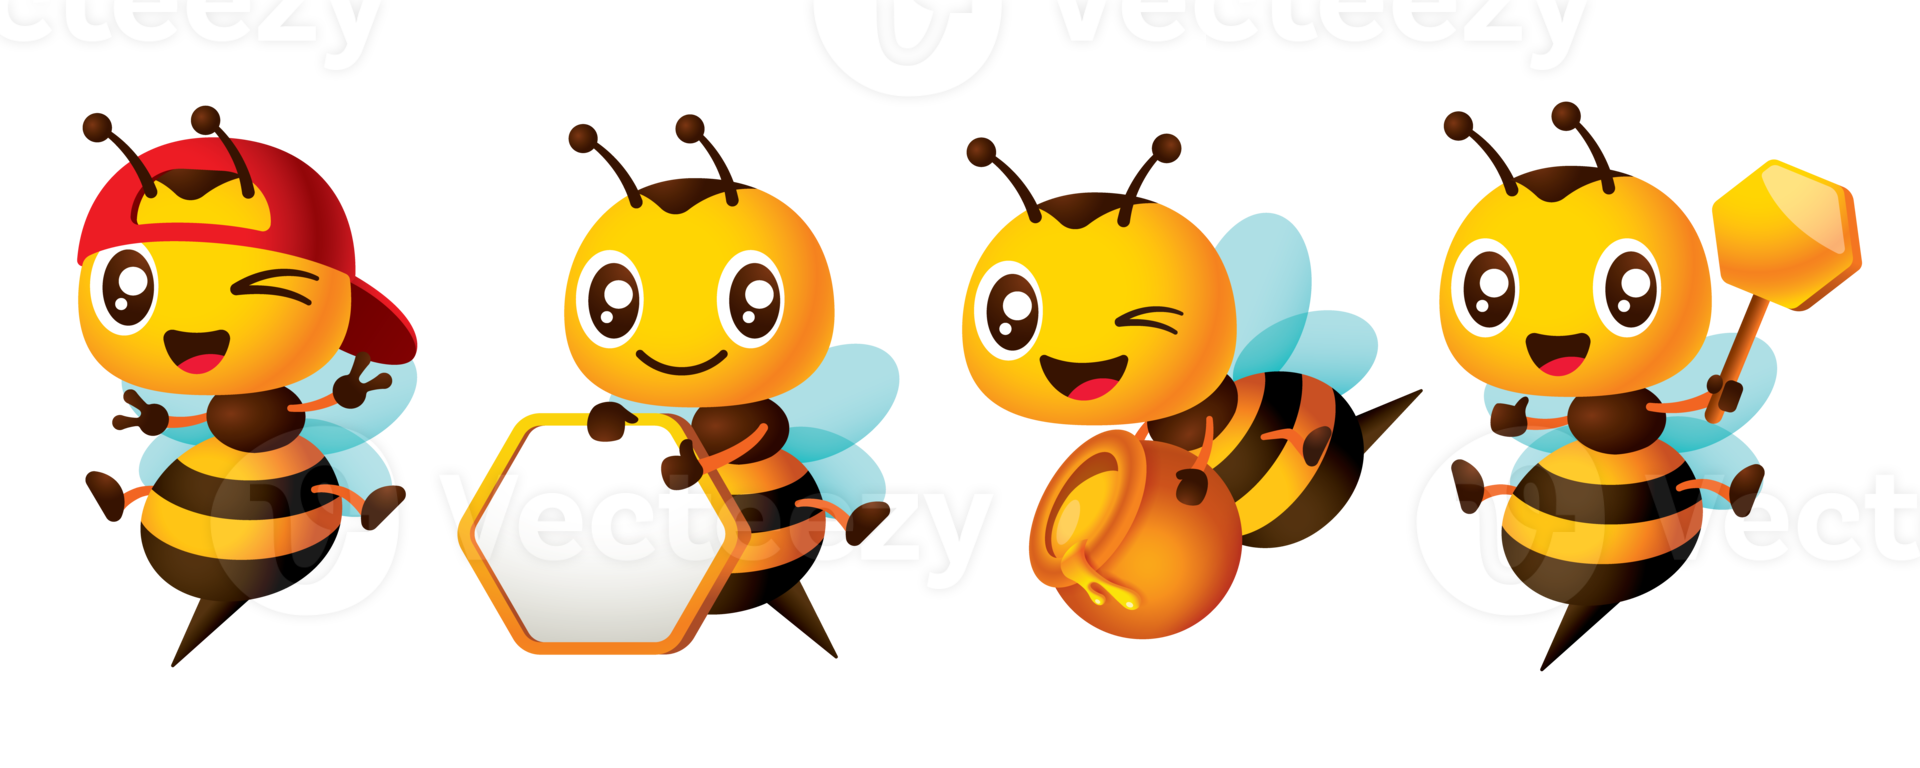 Cartoon cute bee character set series with different poses. Cute Bee holding honey dipper, honeycomb signboard and honey pot, show peace hand sign png